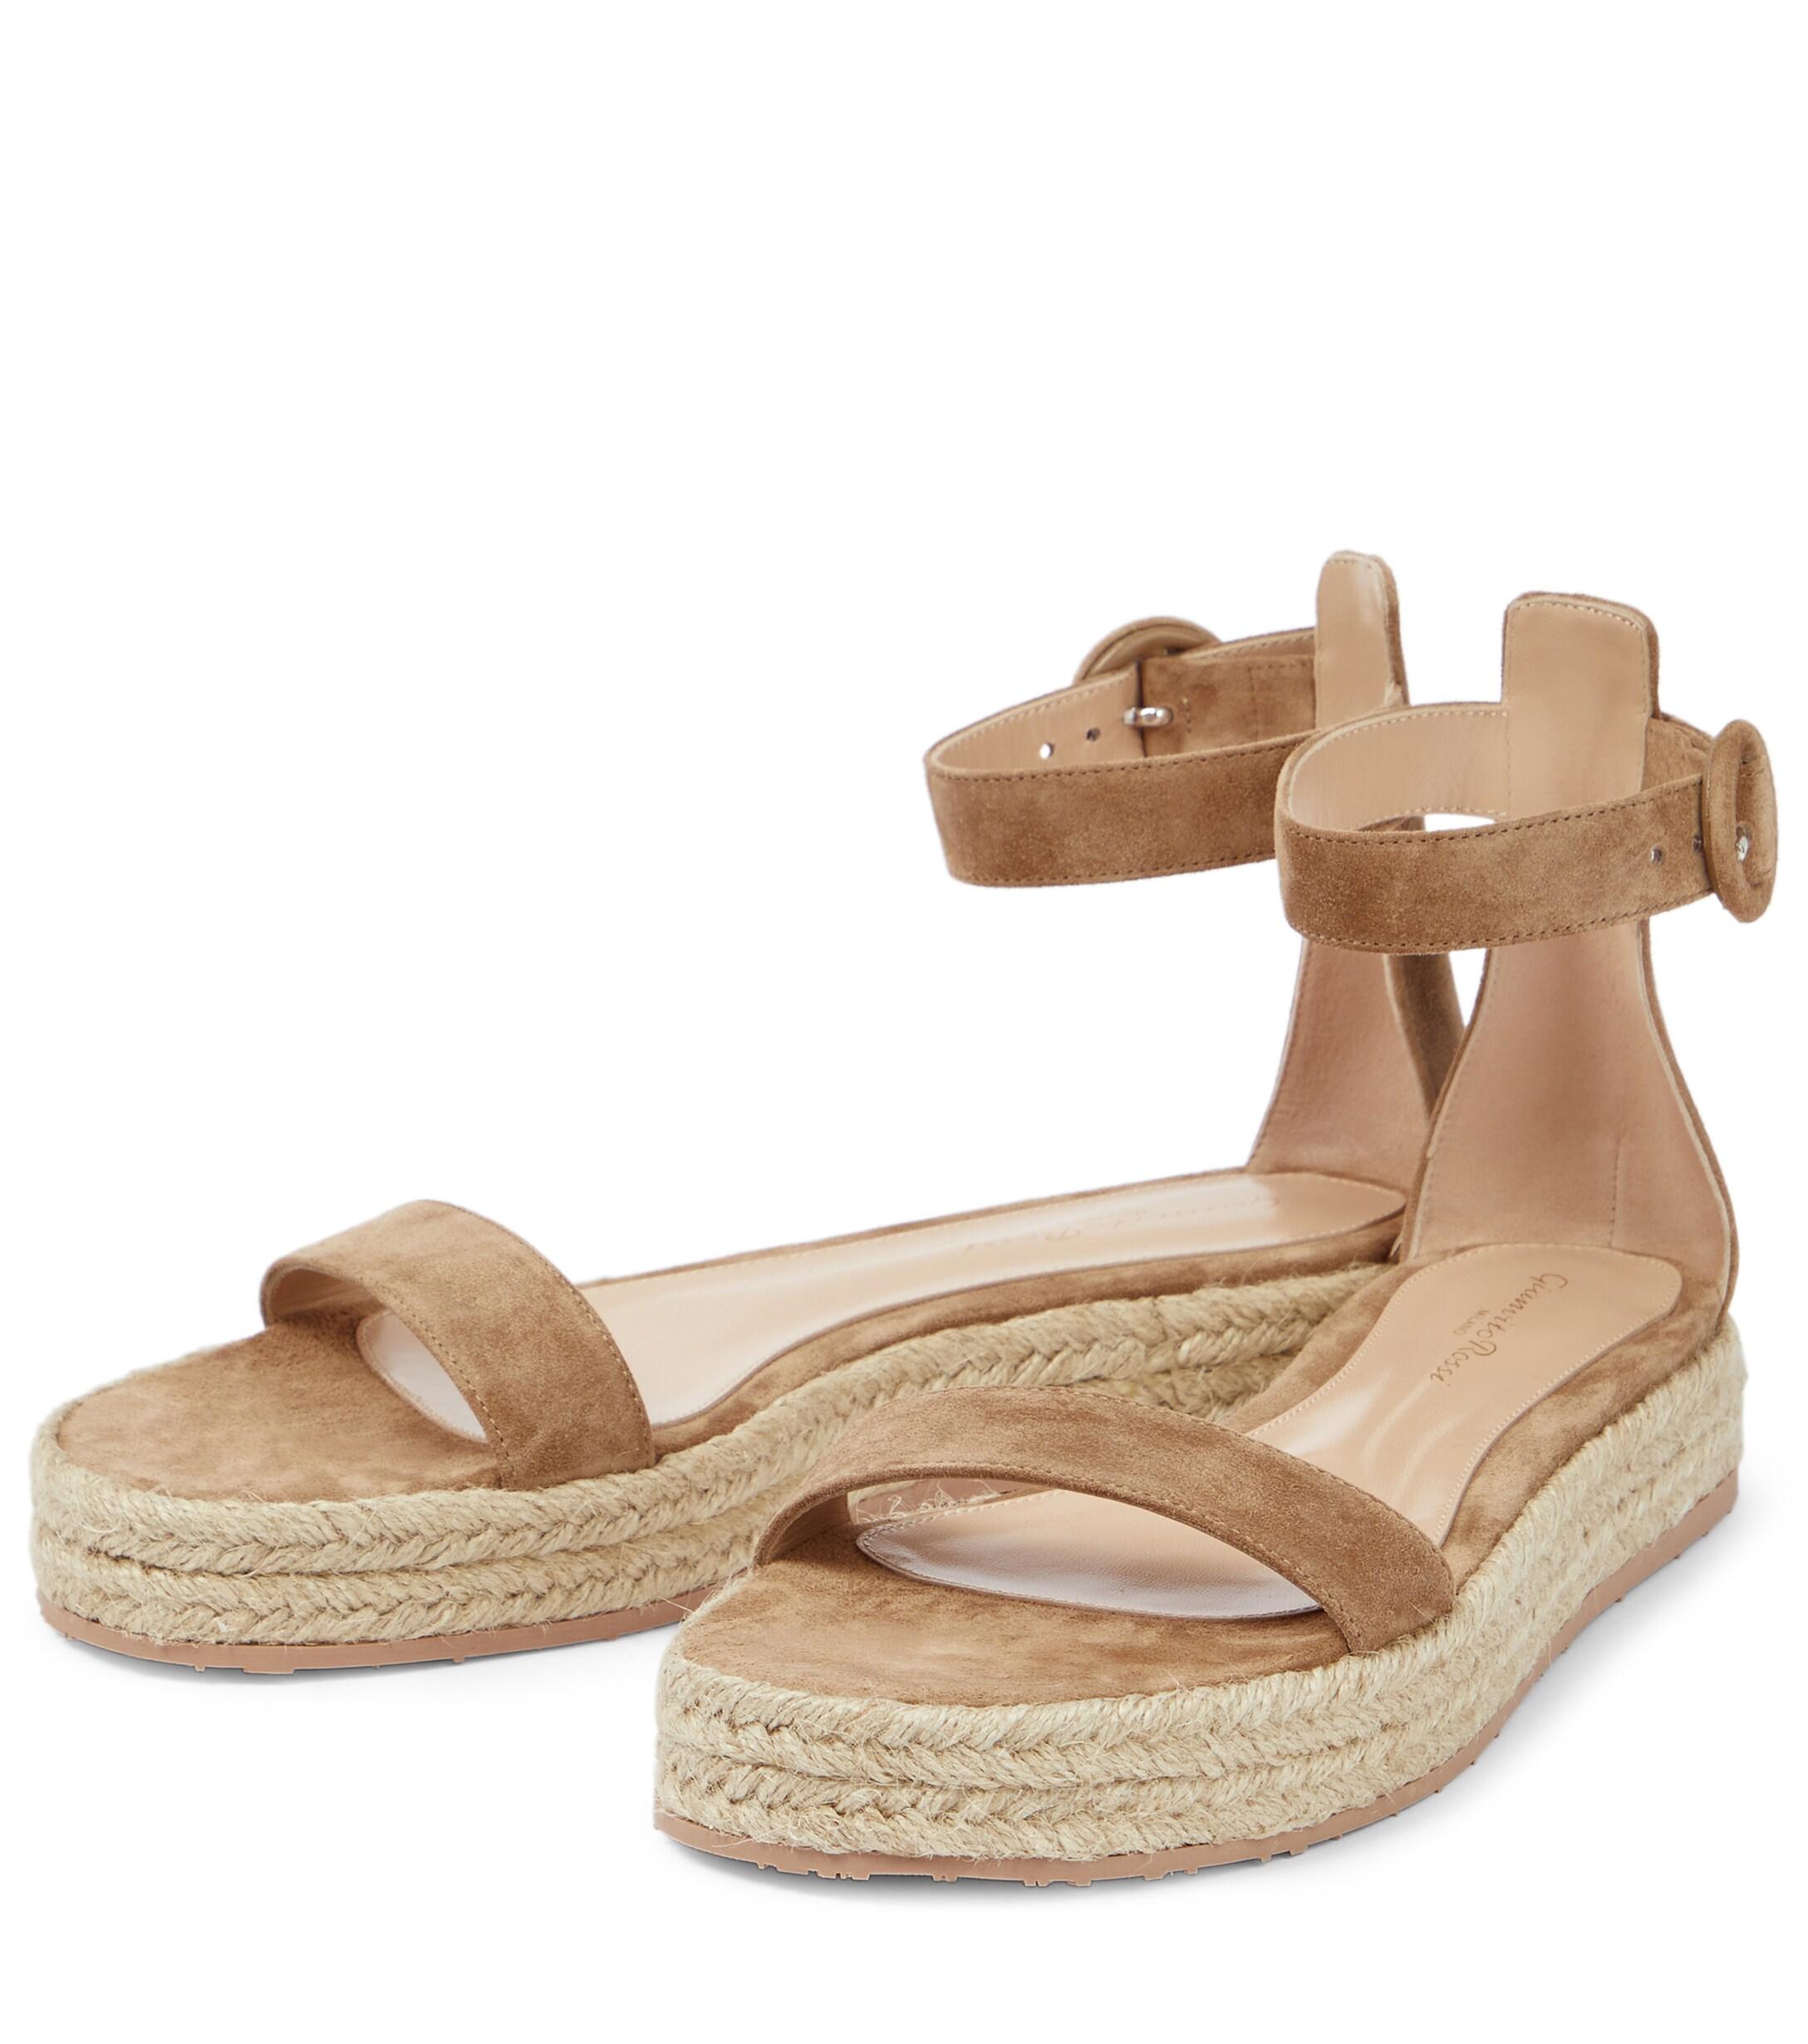 Gianvito Rossi Portofino Suede Espadrille Sandals in Brown Womens Shoes Flats and flat shoes Espadrille shoes and sandals Metallic 